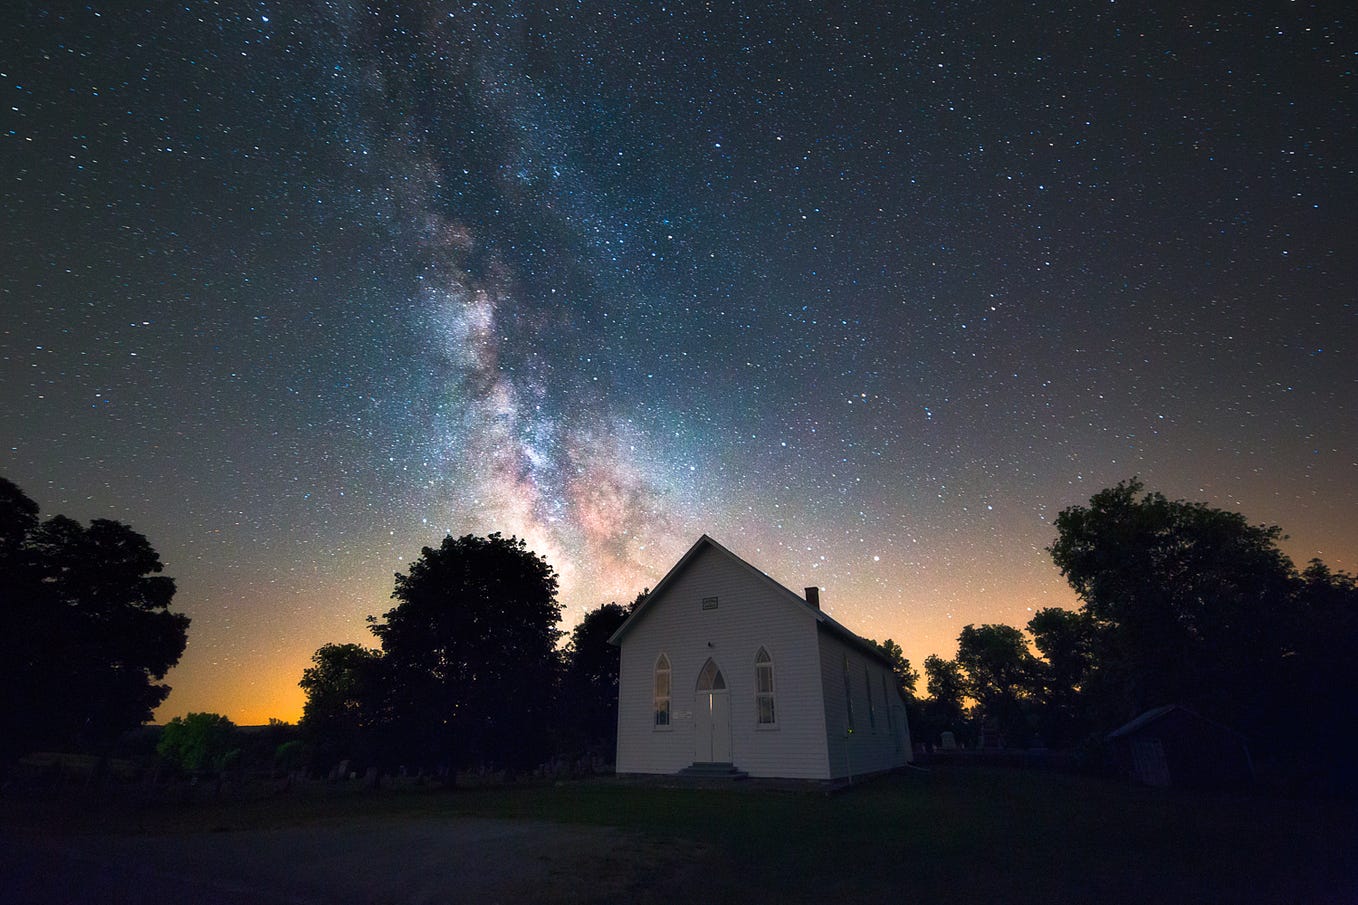 How to photograph the Milky Way